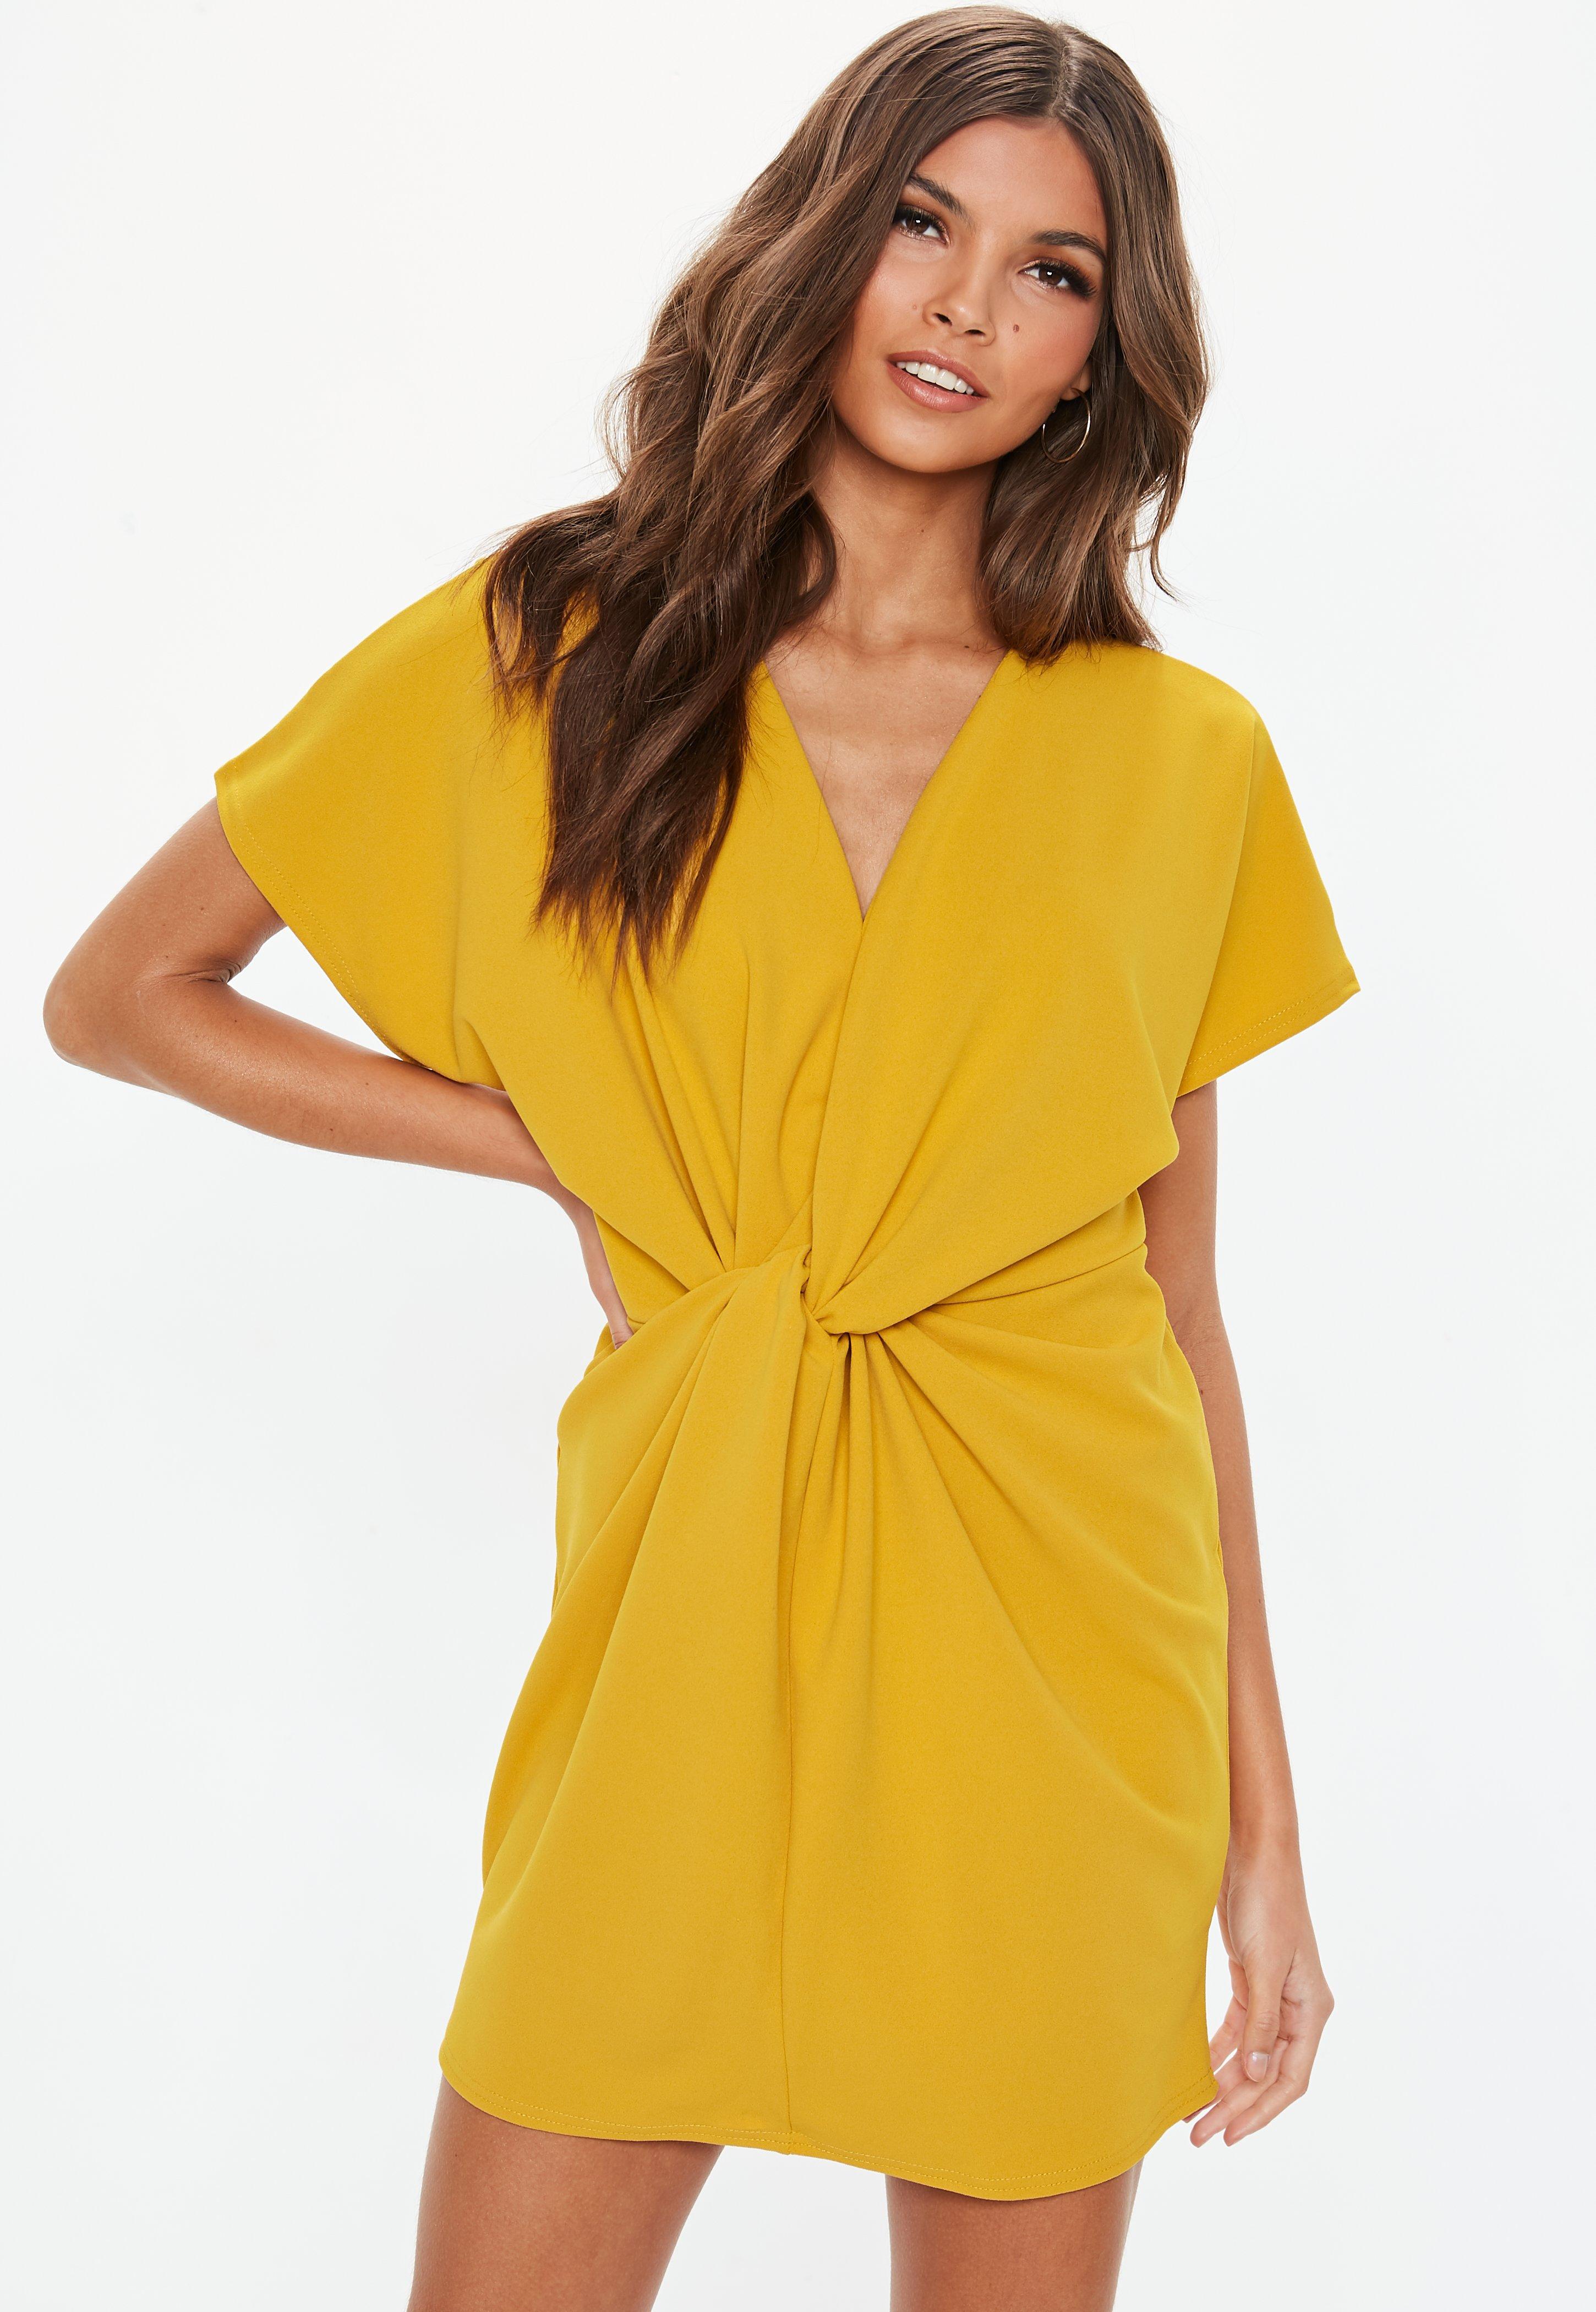 Lyst - Missguided Mustard Yellow Knot Front Shift Dress in Yellow